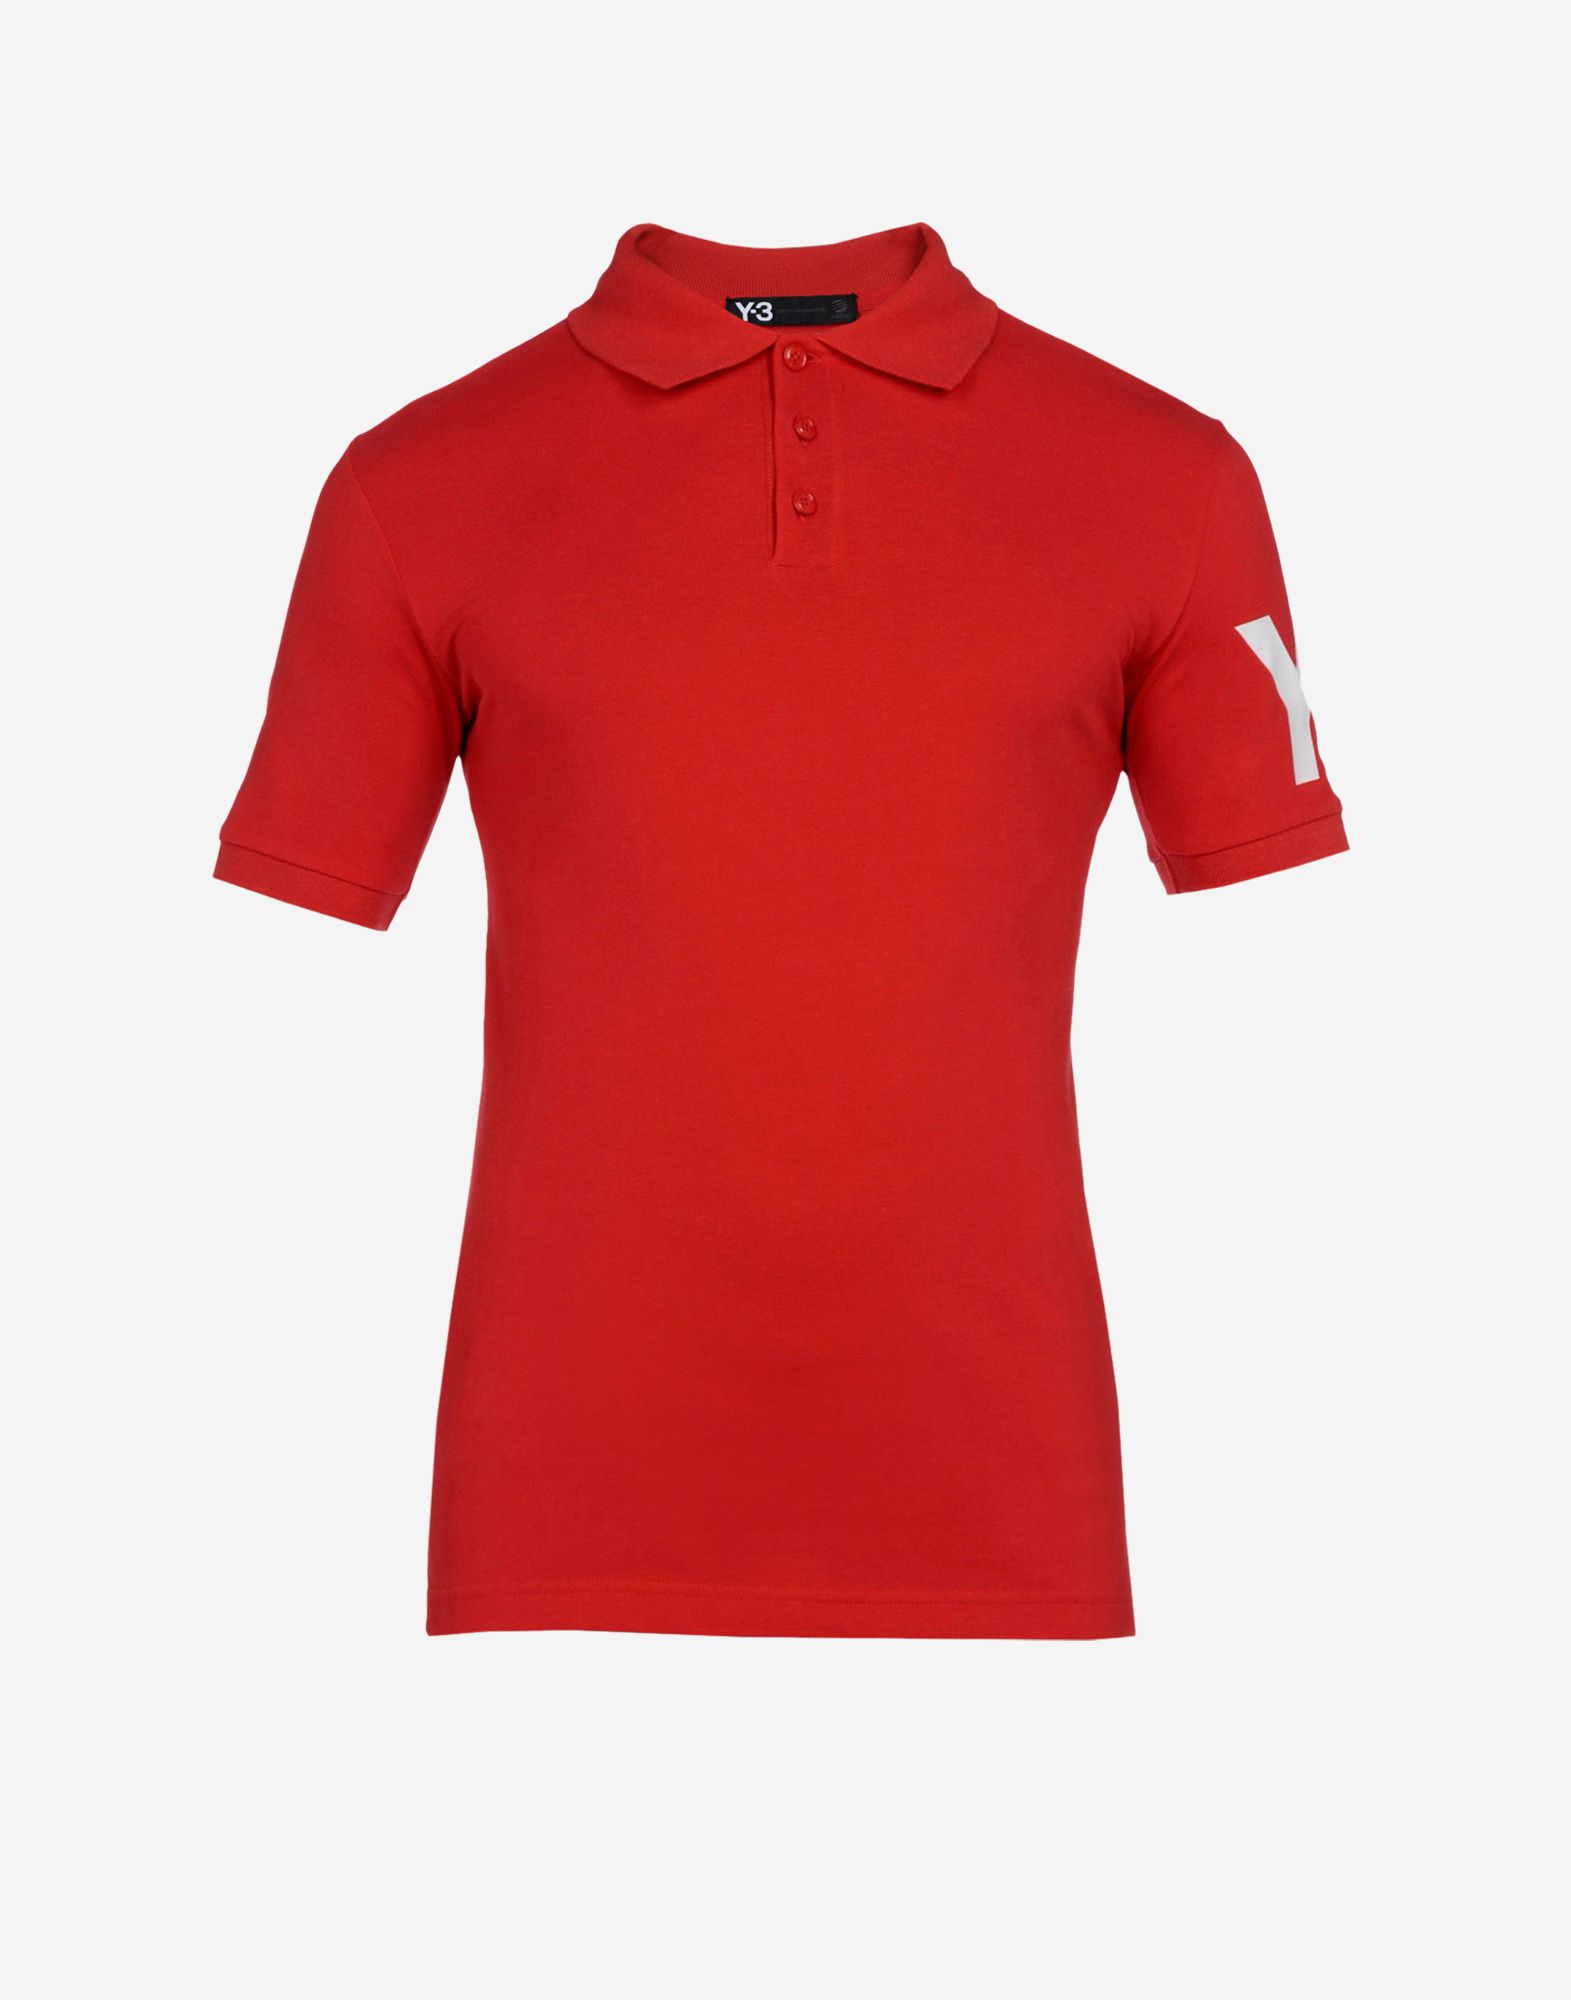 classic polo t shirts online shopping